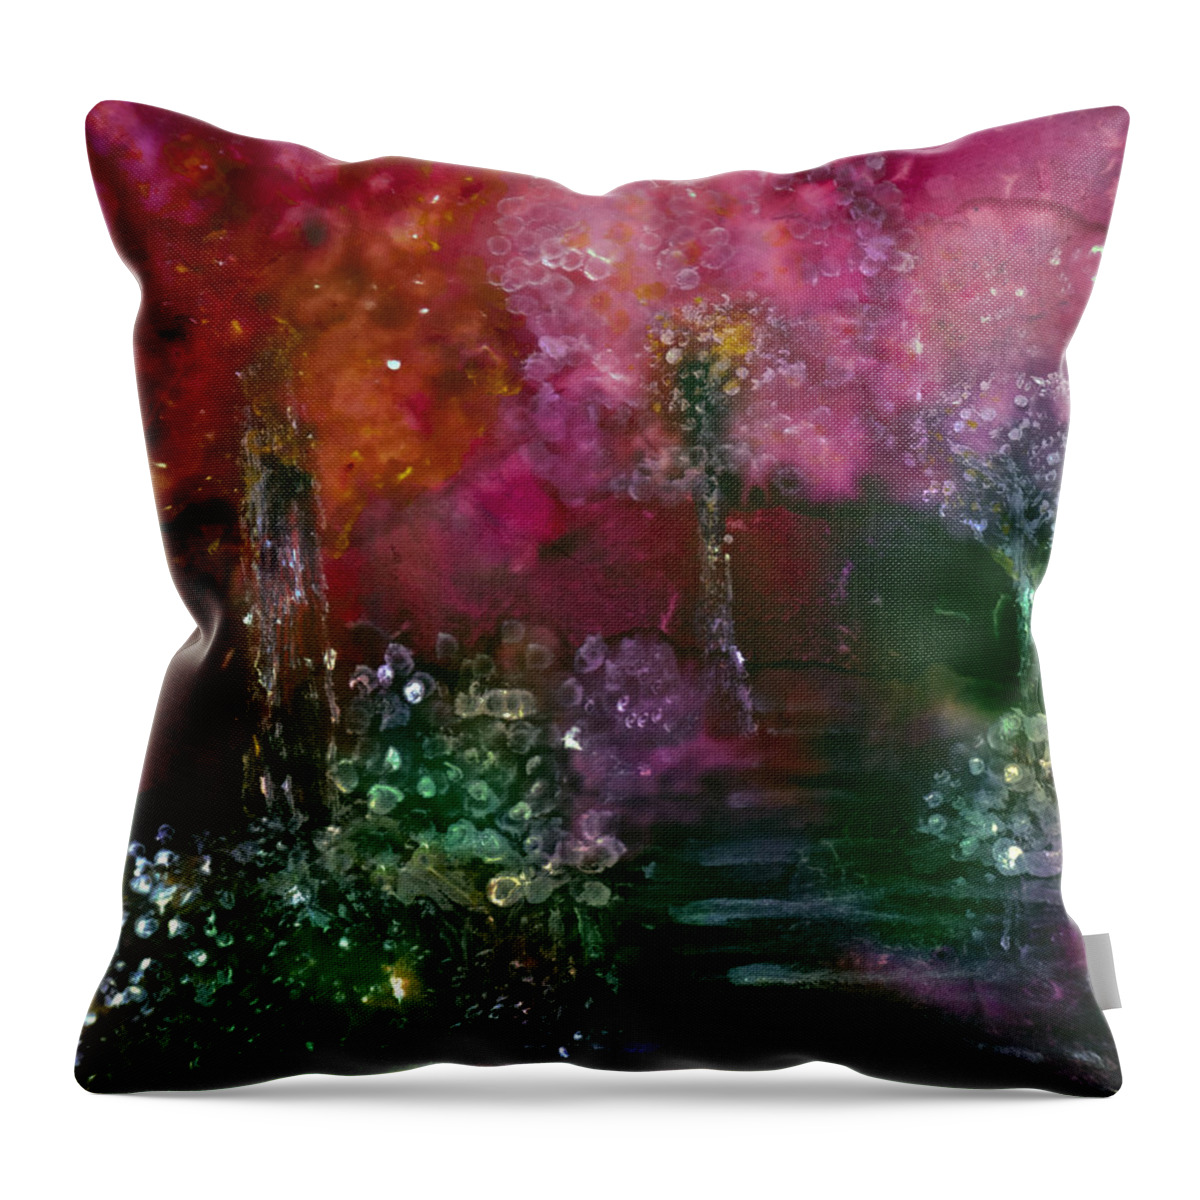 Primrose Painting Throw Pillow featuring the painting Primrose Painting by Don Wright